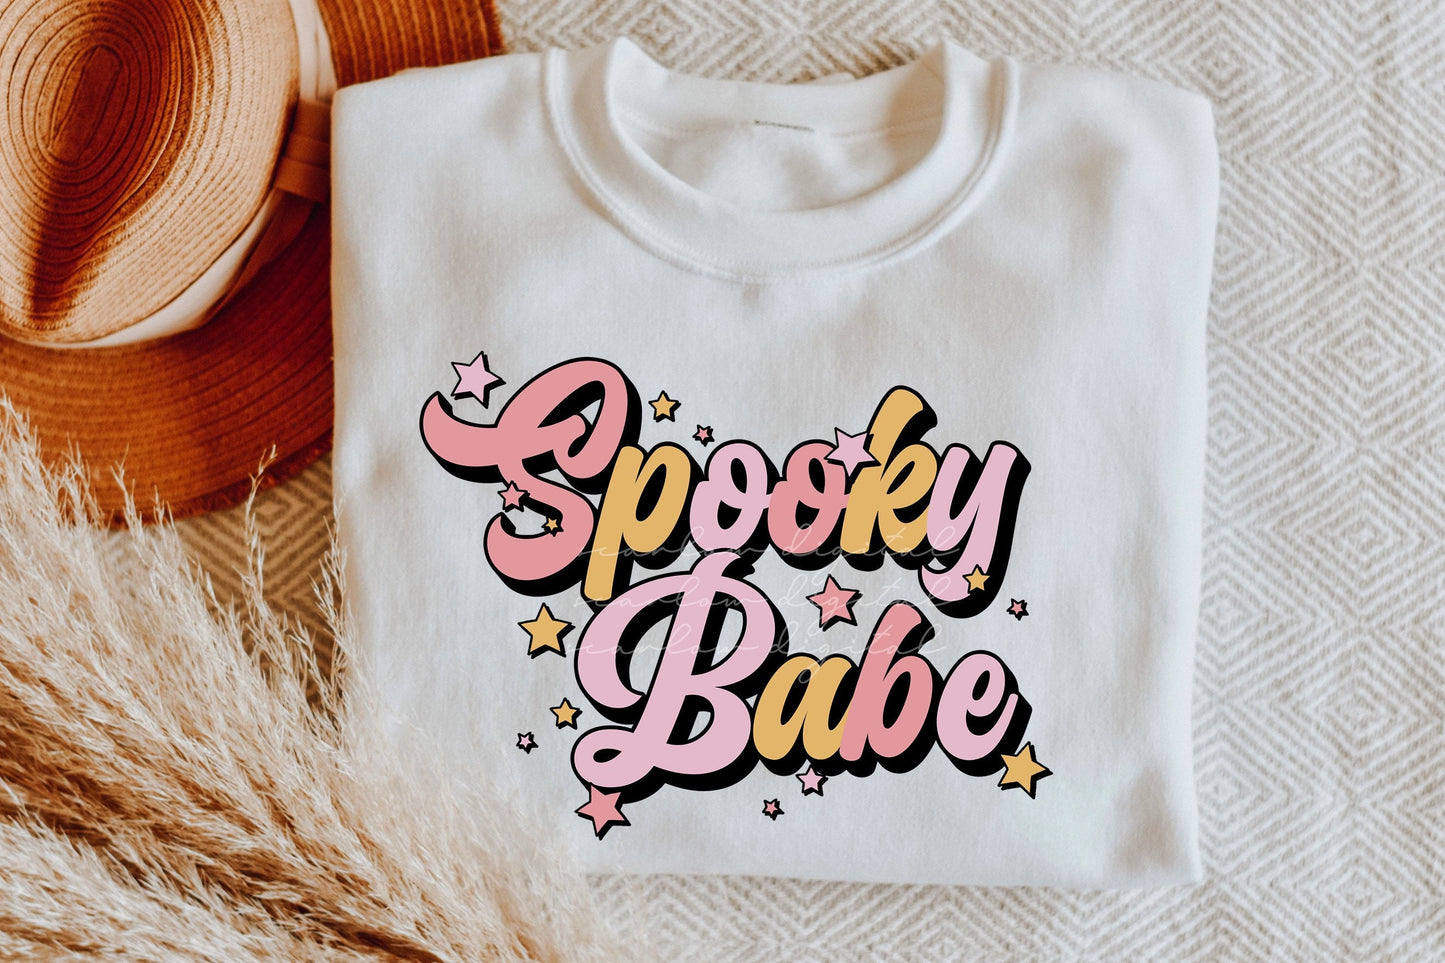 Spooky Babe PNG-Halloween Sublimation Designs-Spooky png, Halloween png, retro Halloween sublimation, boho spooky season png, spooky designs